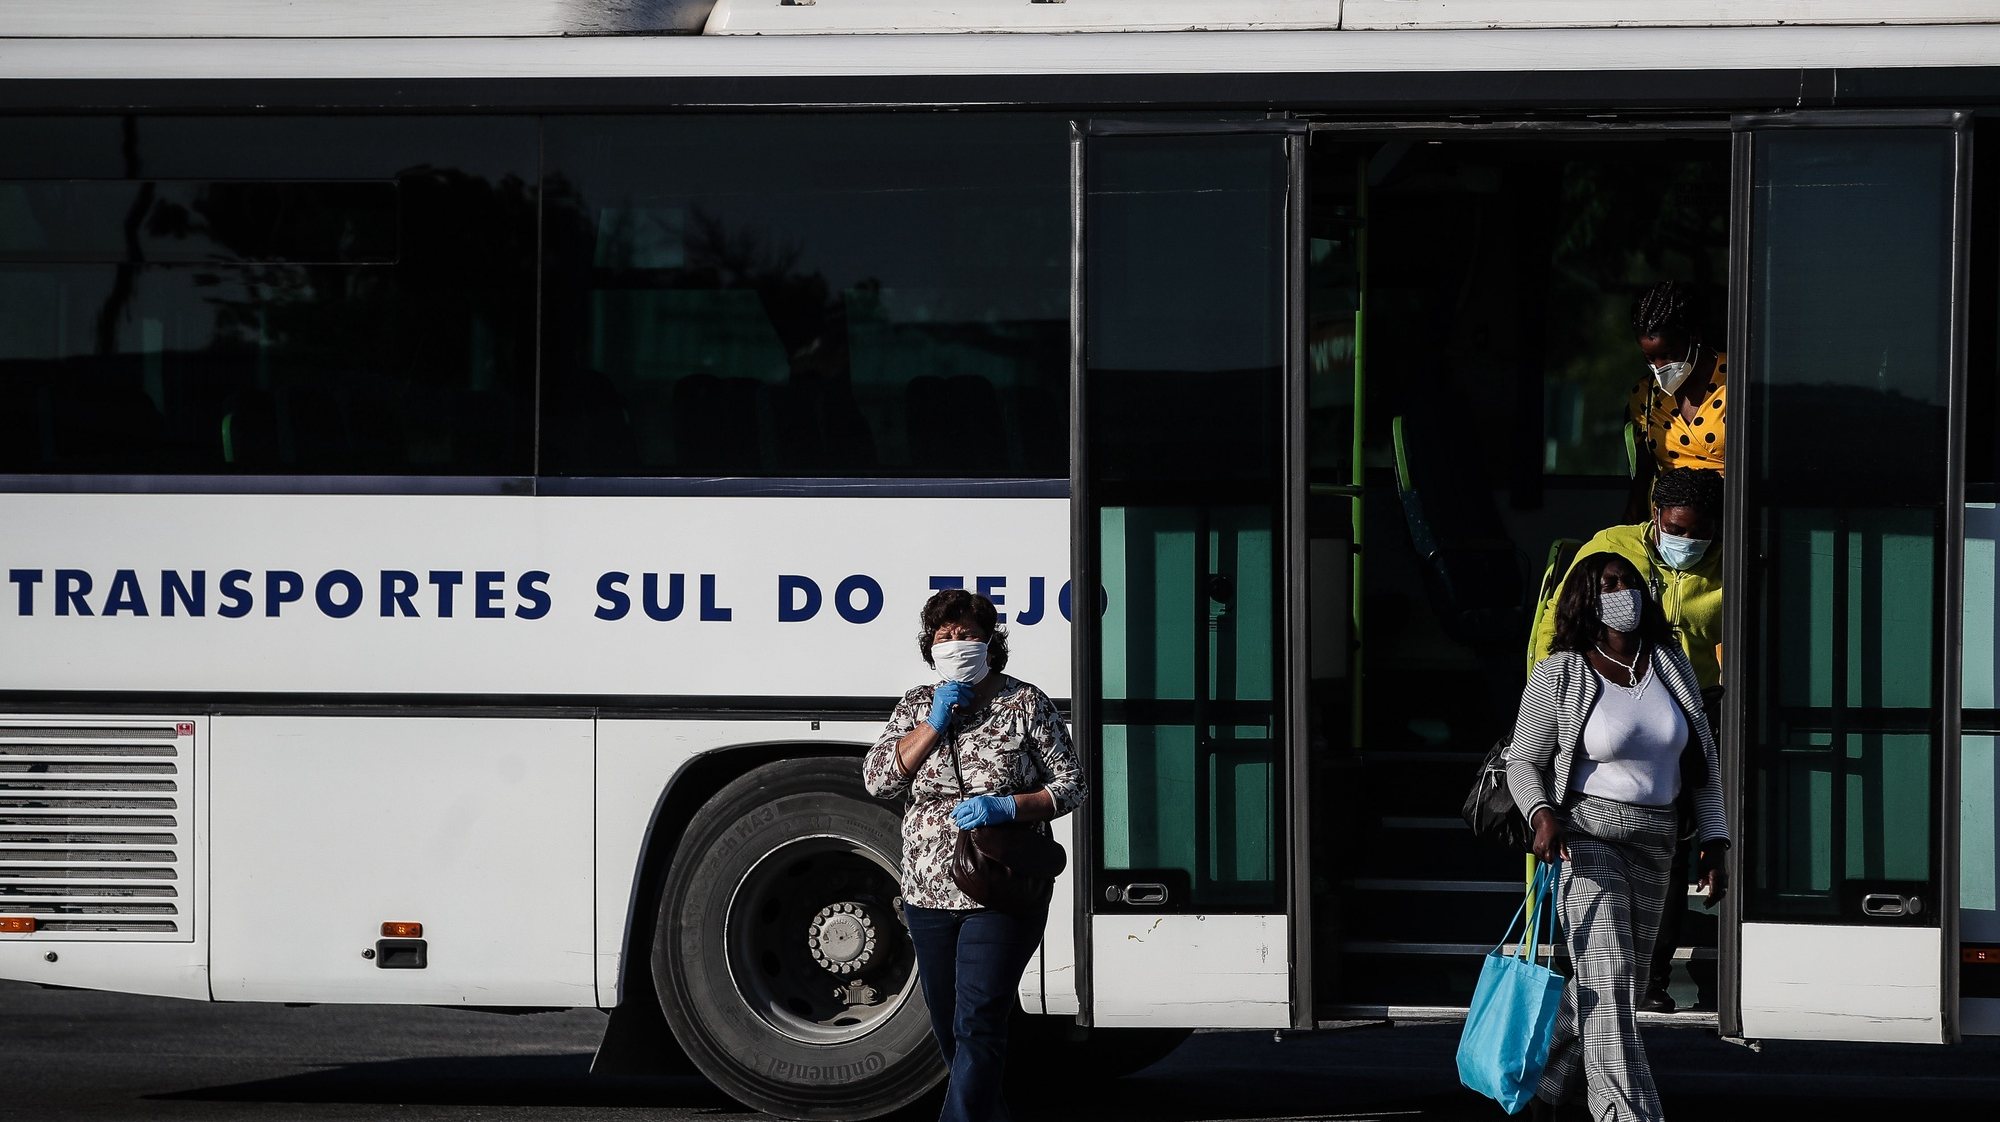 Users exiting a Transportes Sul do Tejo (TST) bus, in Cacilhas, Almada, May 20, 2020. Road transport was reinforced with the entry of the second phase of deconfinement due to the covid-19 pandemic, a Despite this, the races continue with few people, which contrasts with the great use of river transport by Transtejo/Soflusa.  (FOLLOW THE TEXT).  MÁRIO CRUZ/LUSA